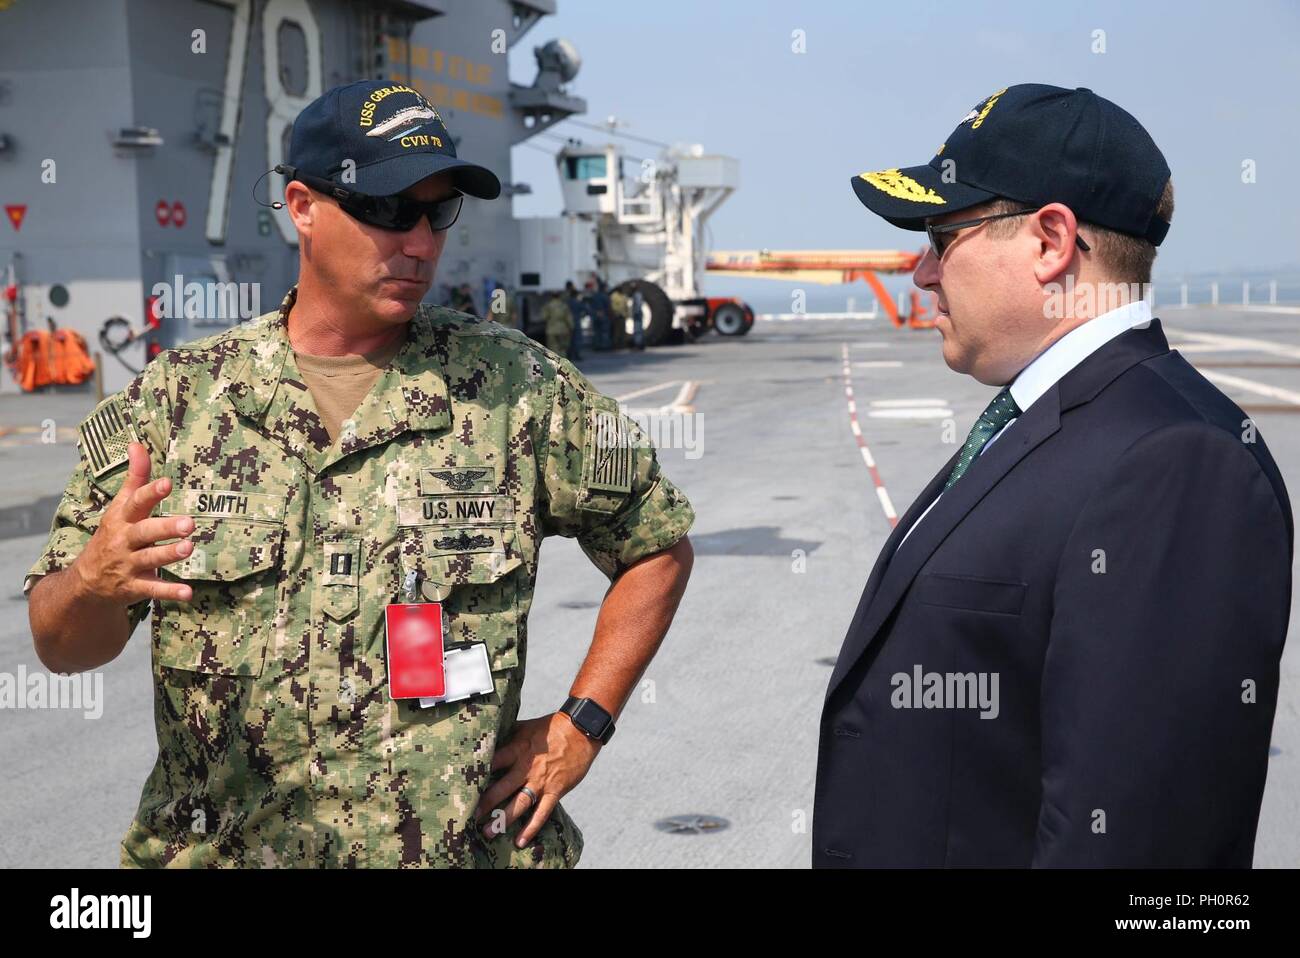 NORFOLK, Va. (June 20, 2018) – Matt Shipley, deputy assistant secretary of defense for force readiness, listens as Lt. Howard Smith, from Gainsville, Texas, assigned to USS Gerald R. Ford’s (CVN 78) air department, explains Ford’s unique flight deck layout during a tour of the ship. Stock Photo